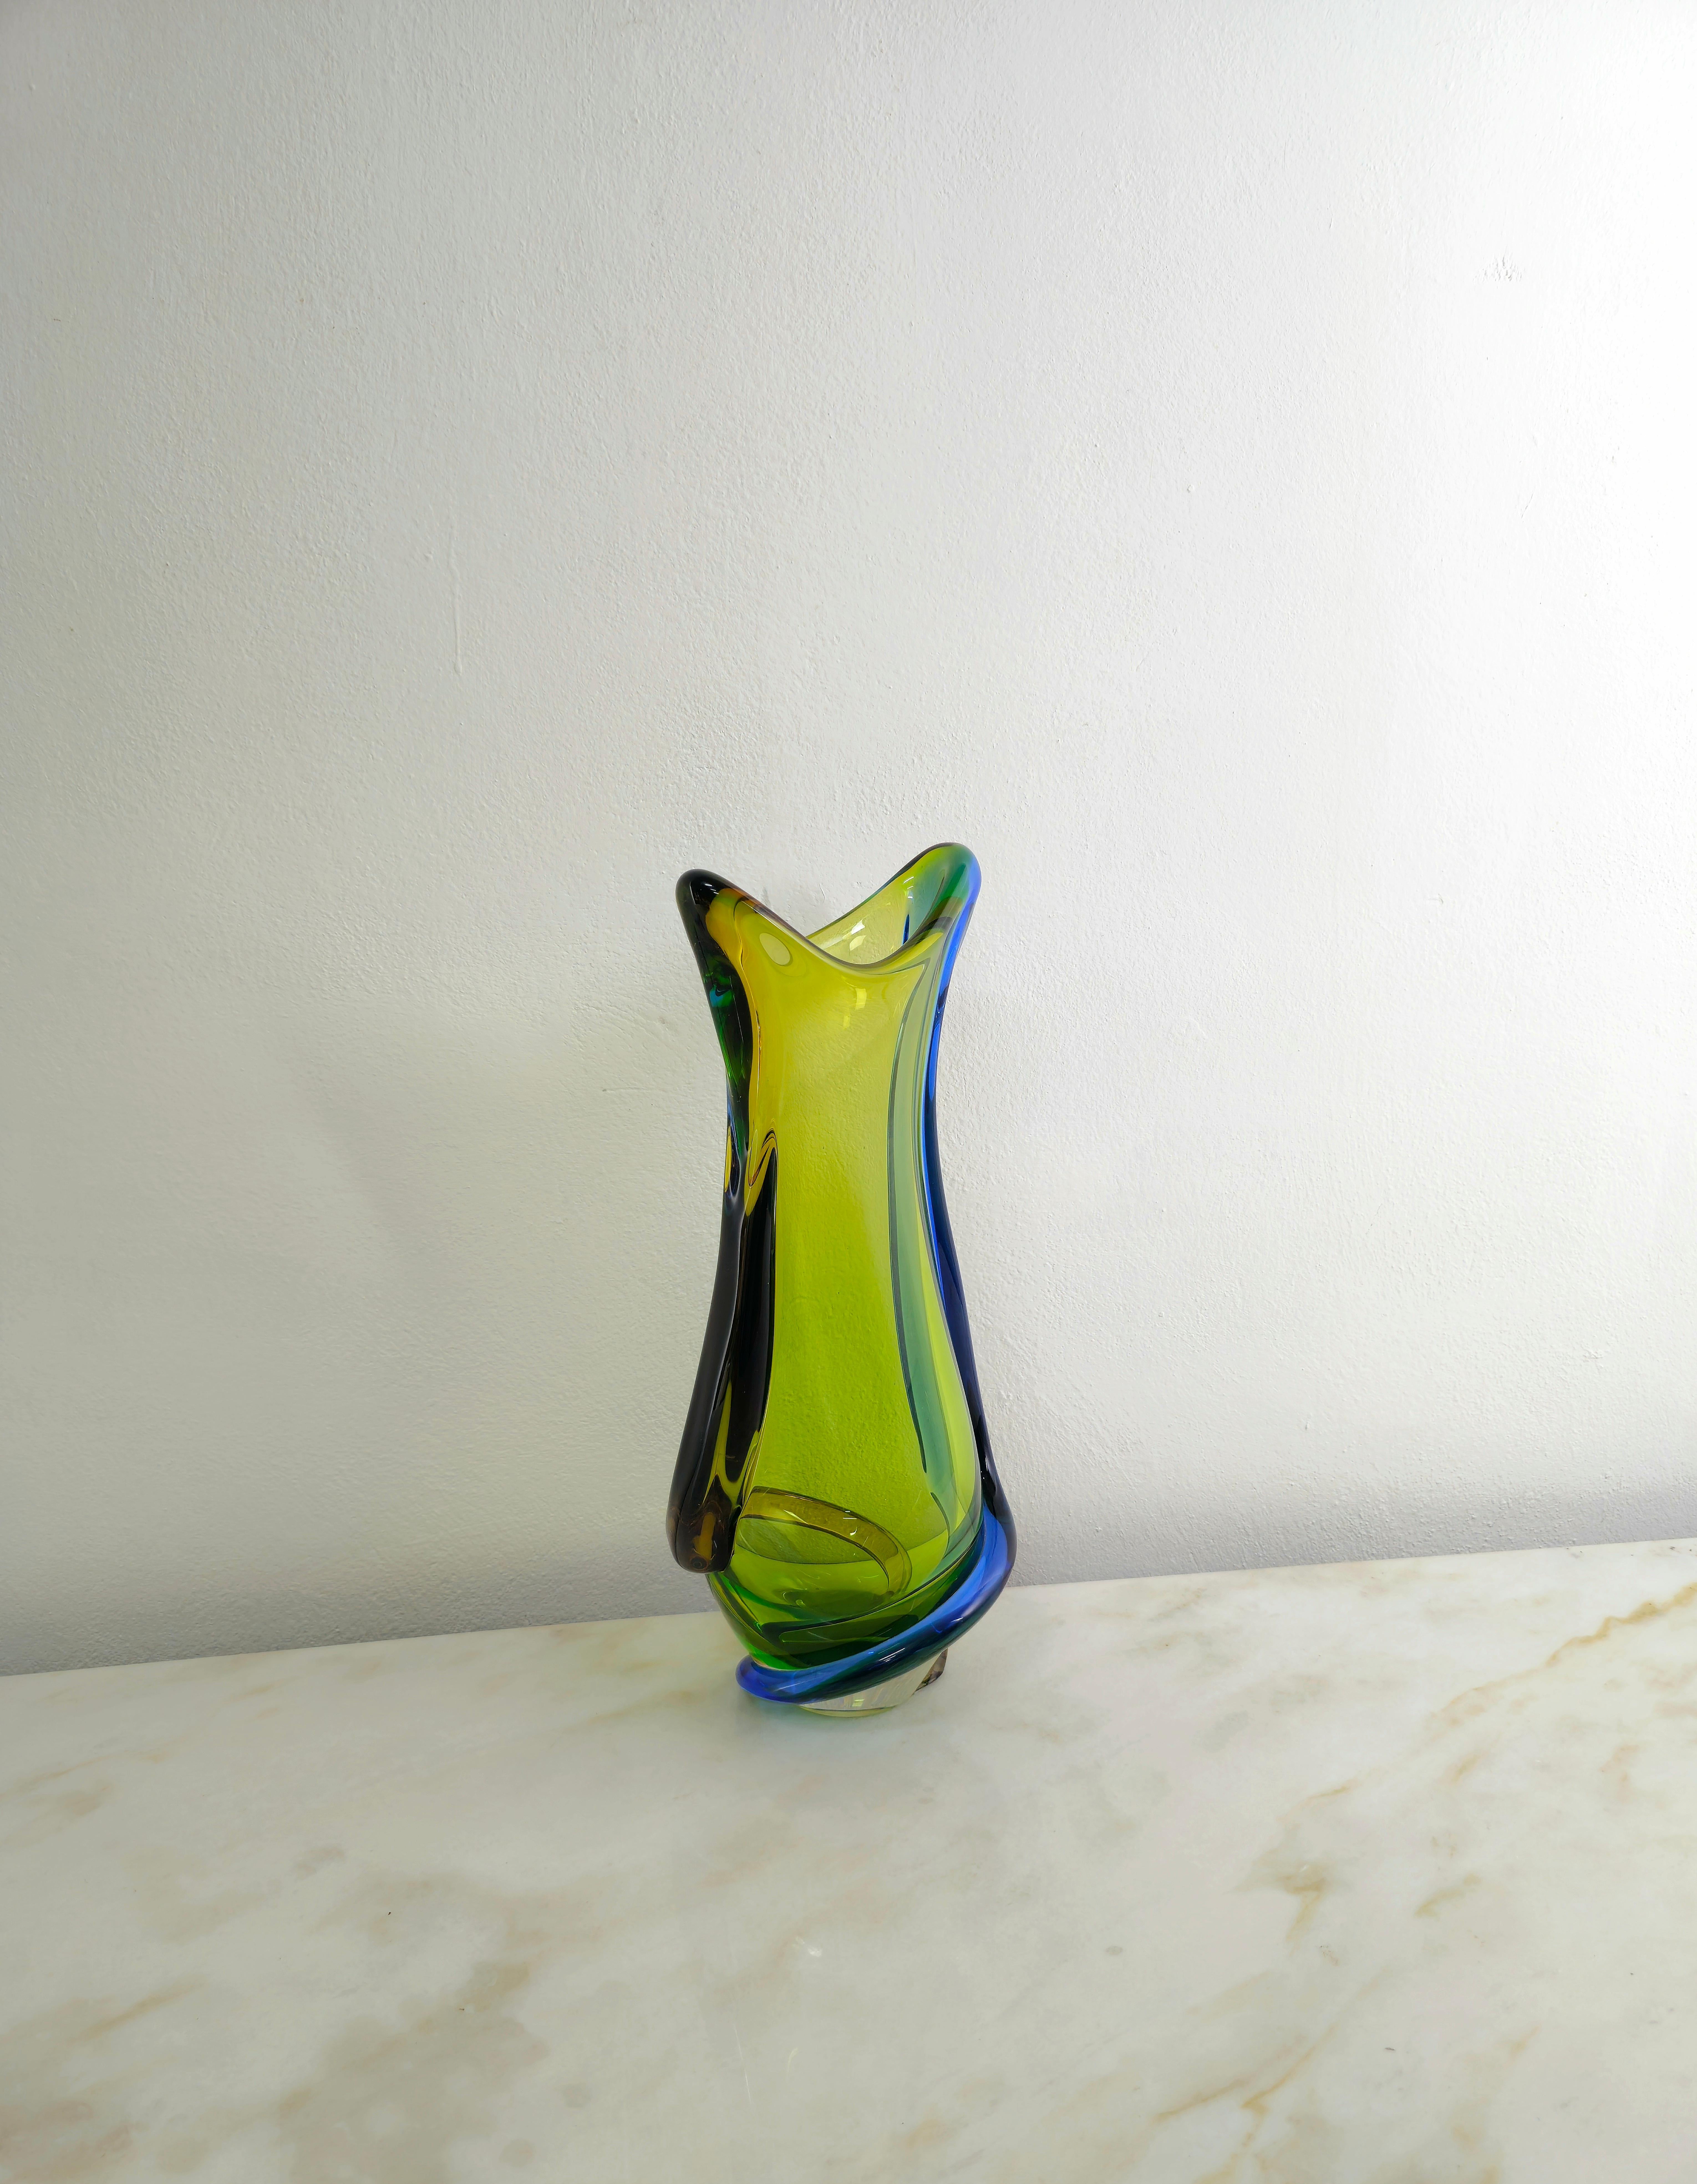 Vase Decorative Object Murano Glass Attributed to Flavio Poli Midcentury 1970s For Sale 6